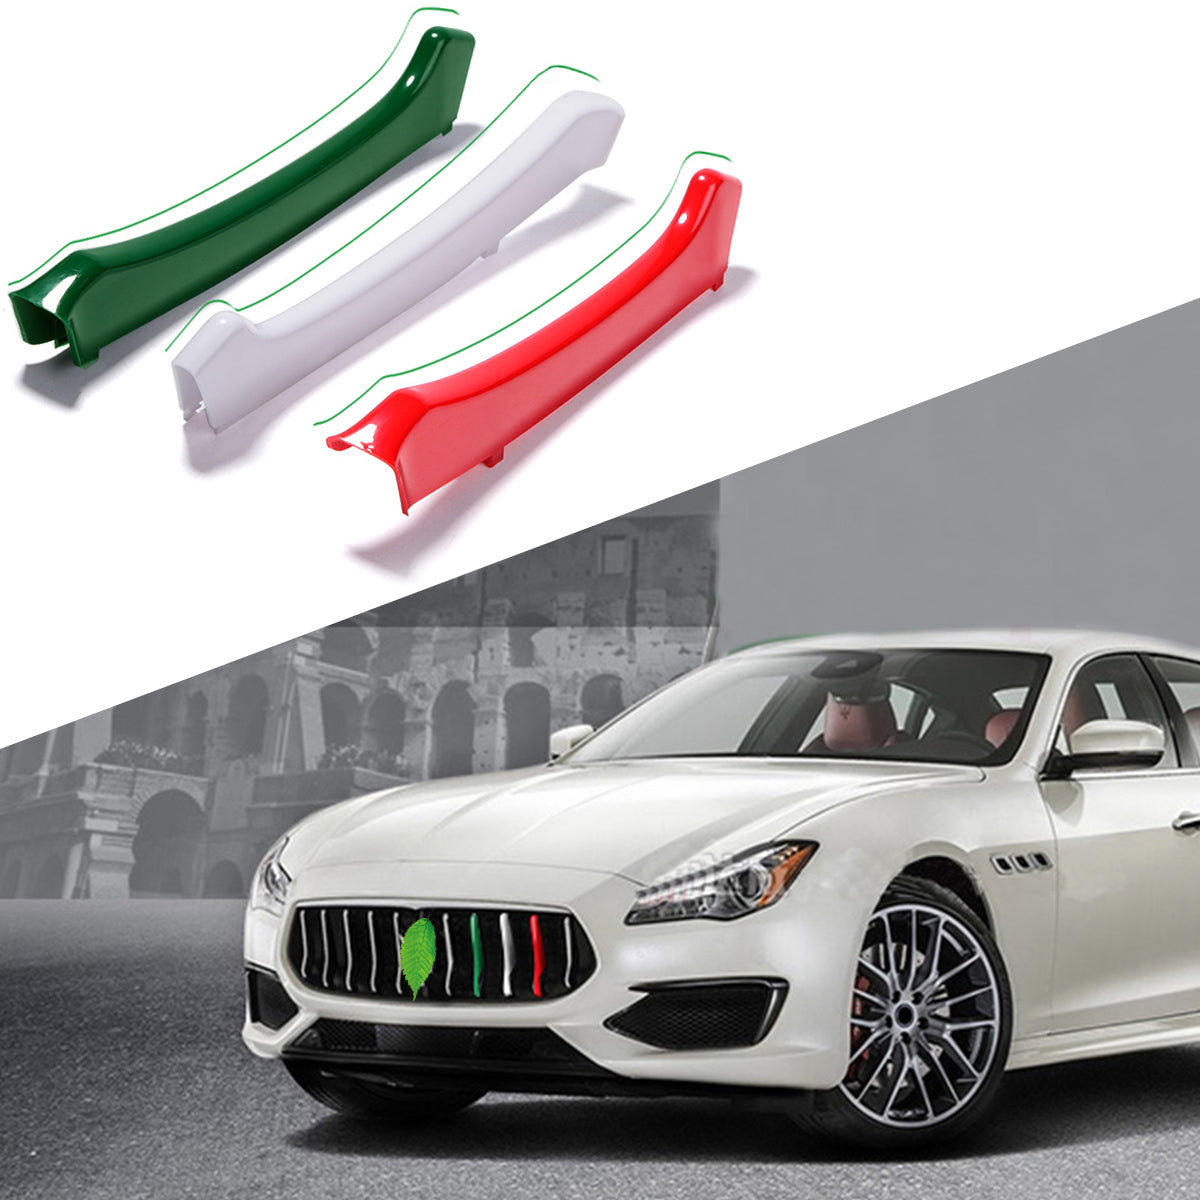 Tomato M Color ABS Car Front Grill Grille Cover Clip Trim Moulding Trim Strip for Maserati Ghibli 2014-2017